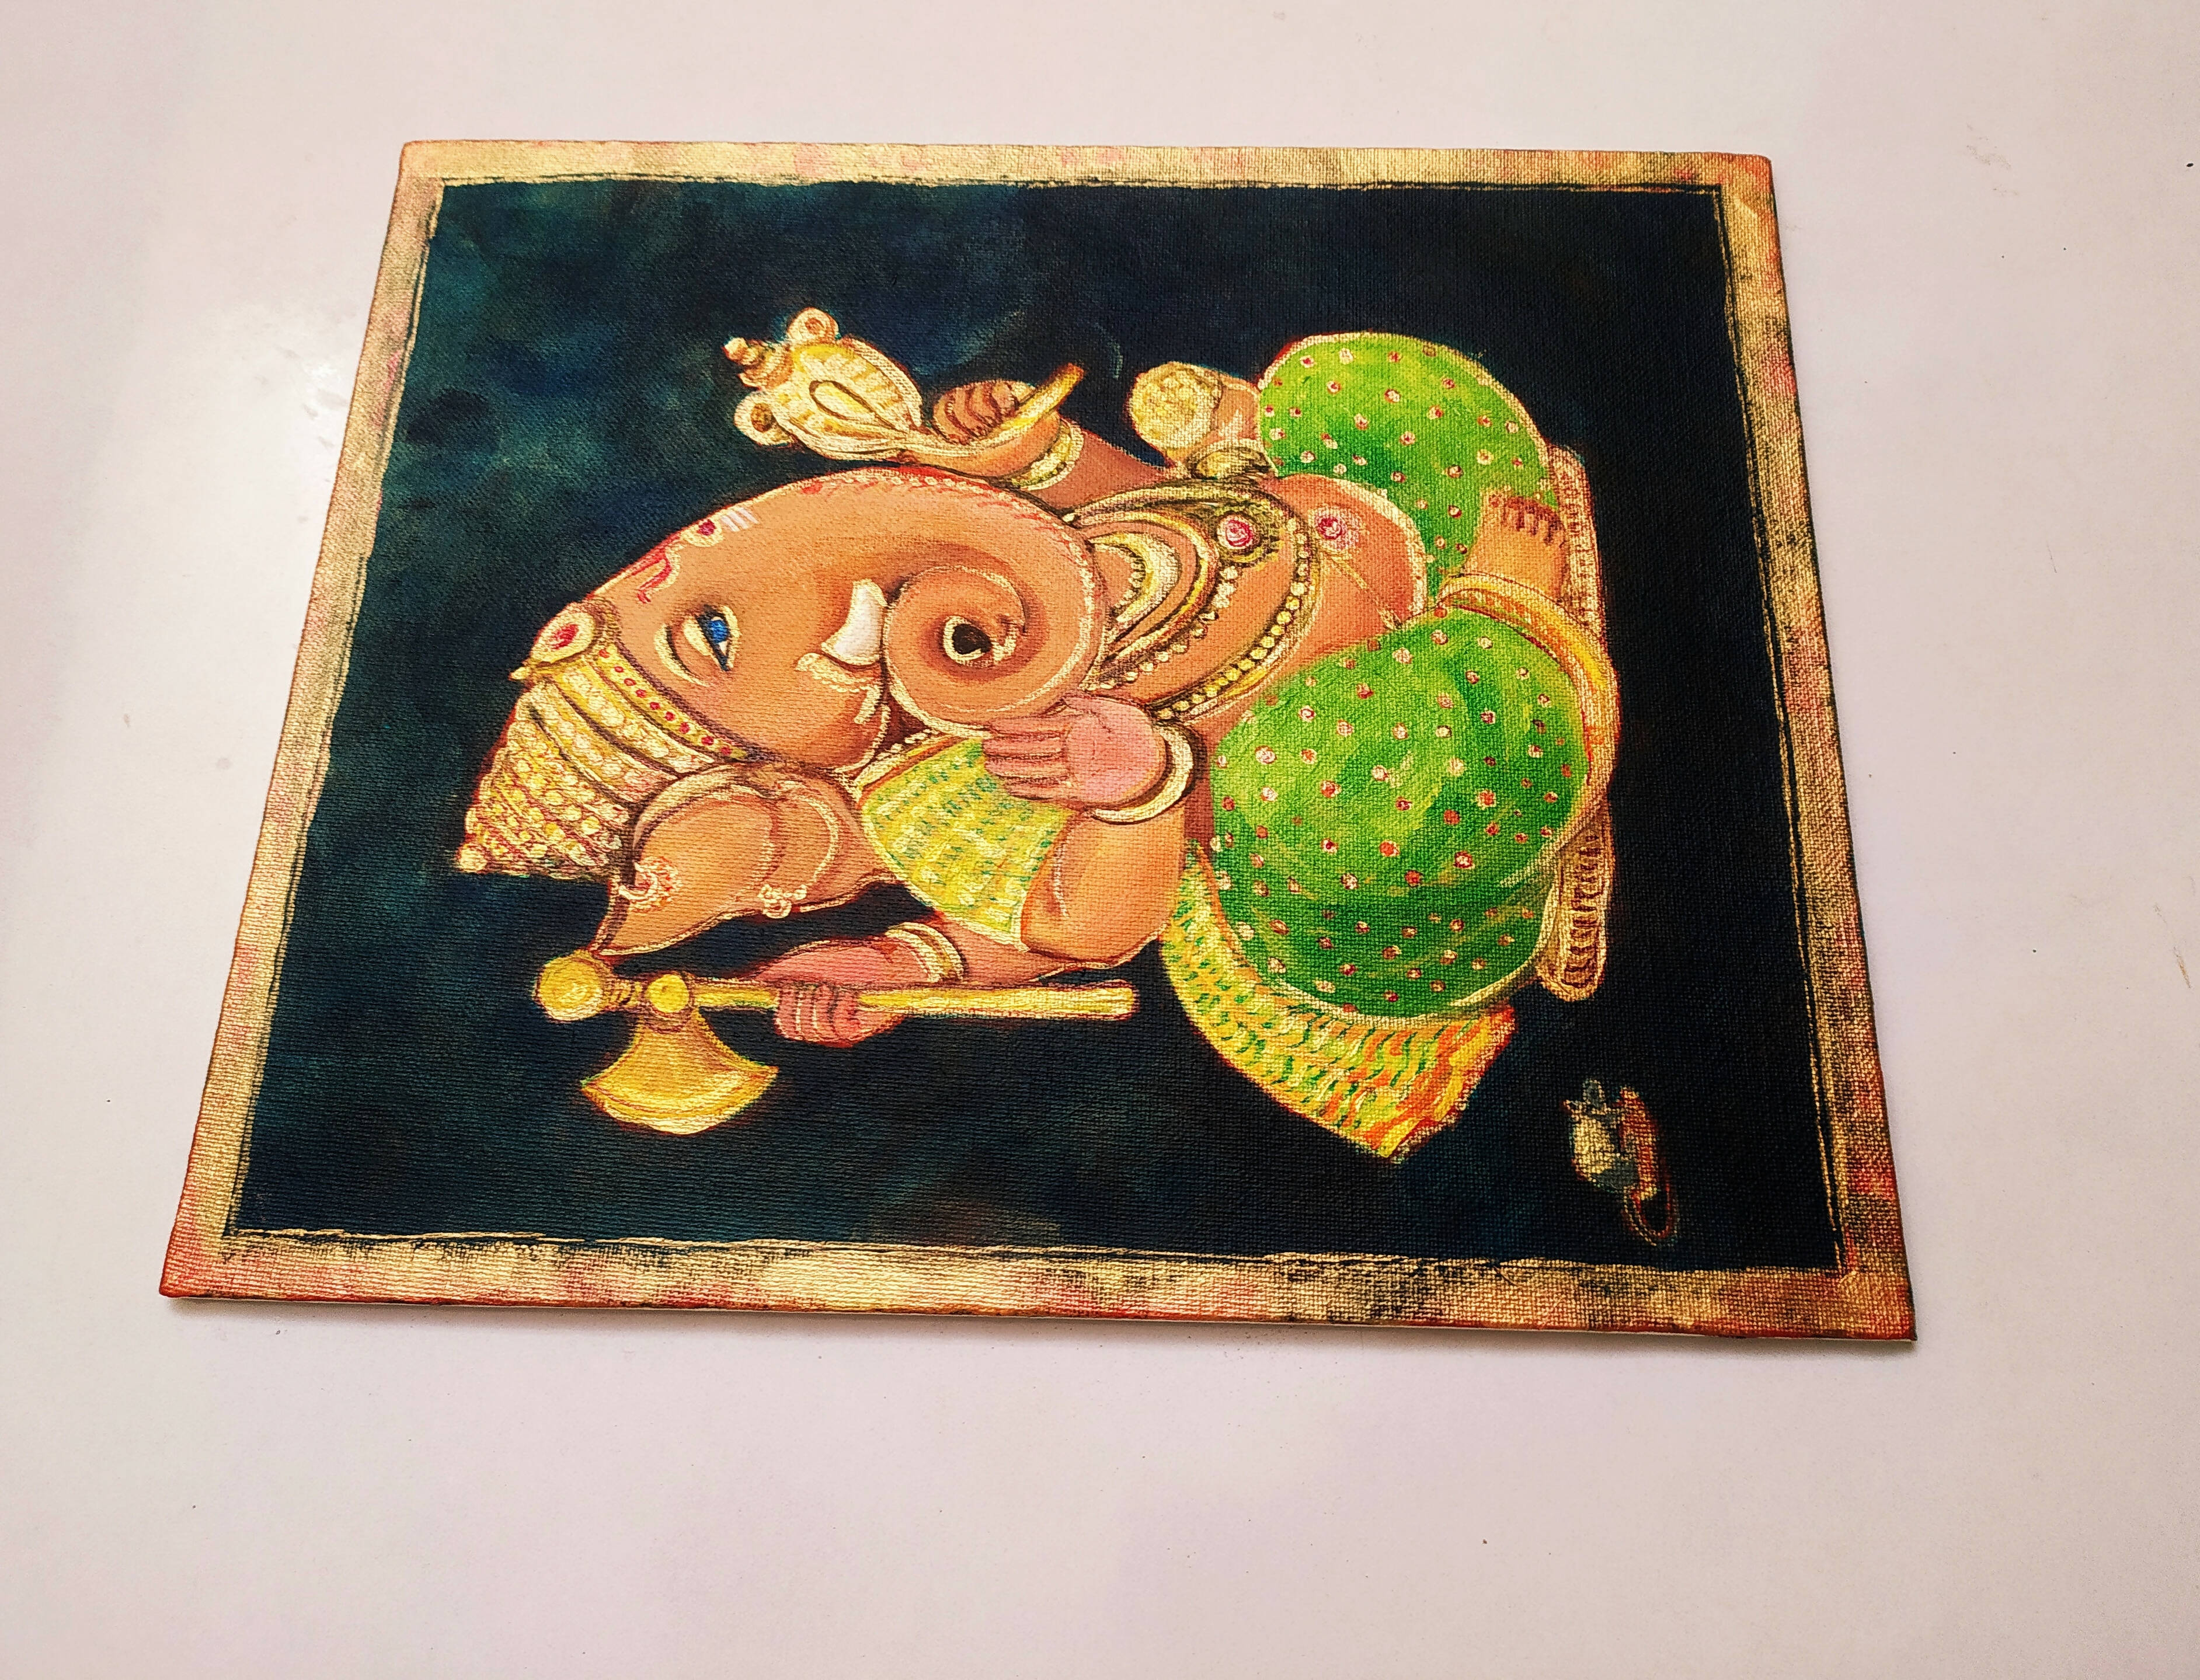 Lord Ganesh acrylic painting on canvas